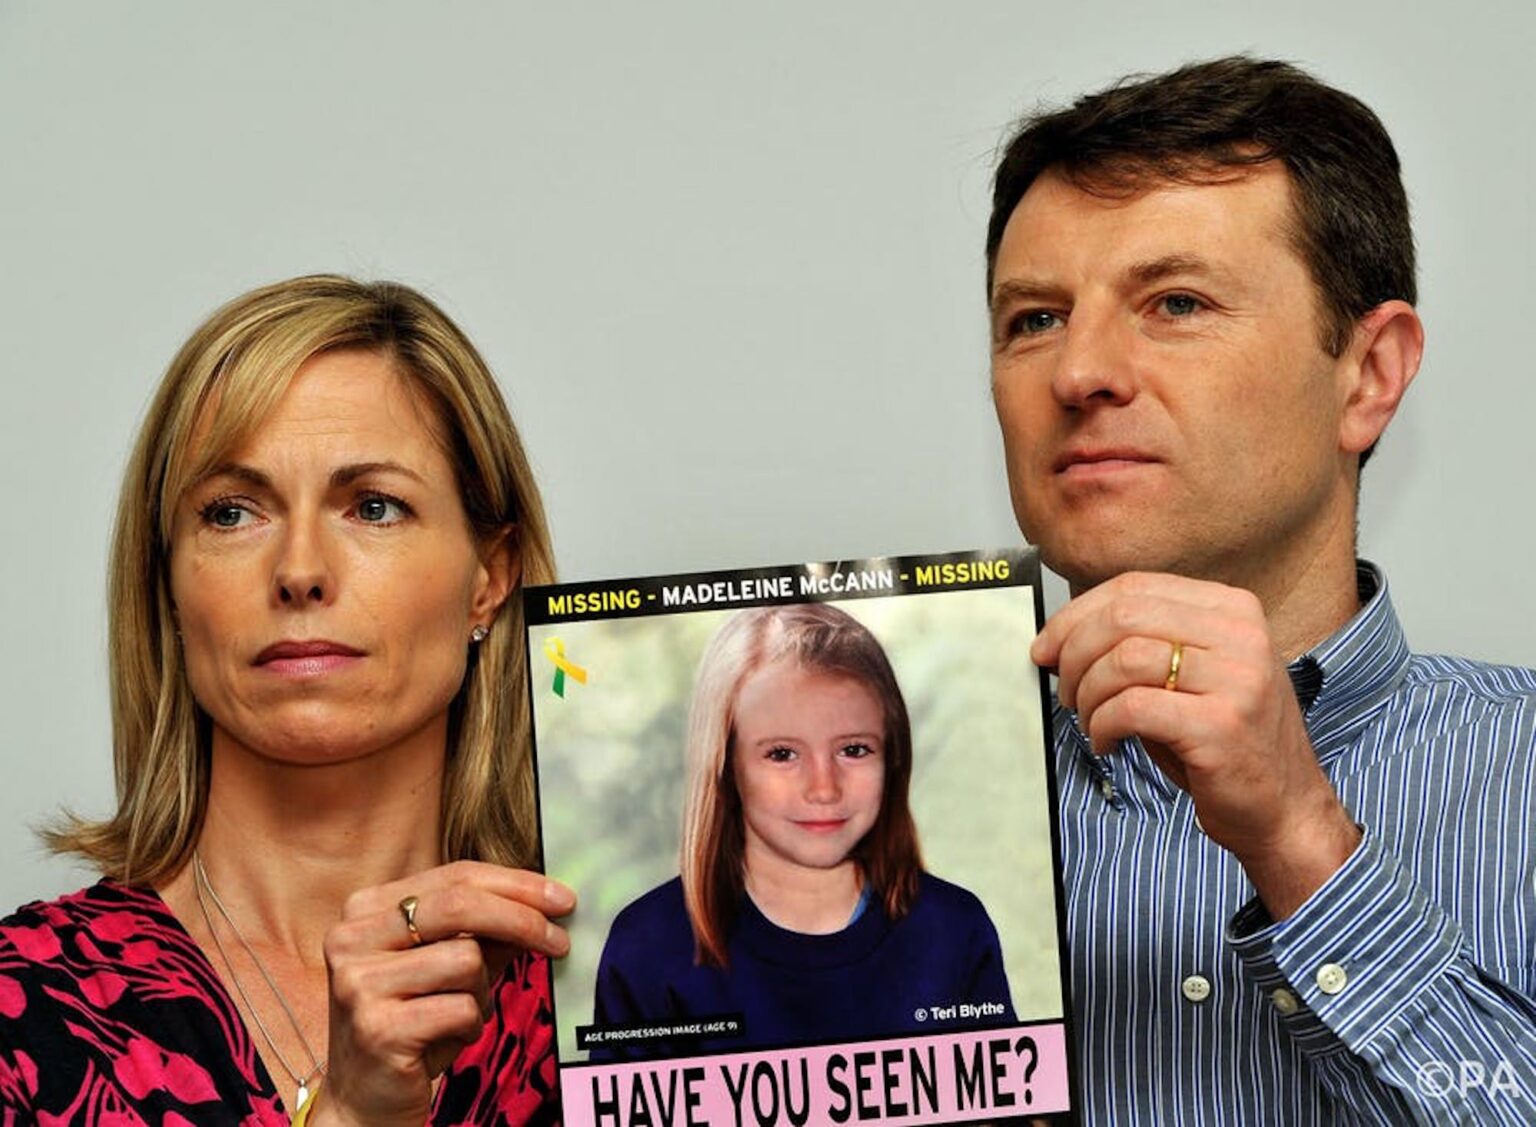 There are still more questions than answers in the case of Madeleine McCann? See if the missing young girl will ever be found.